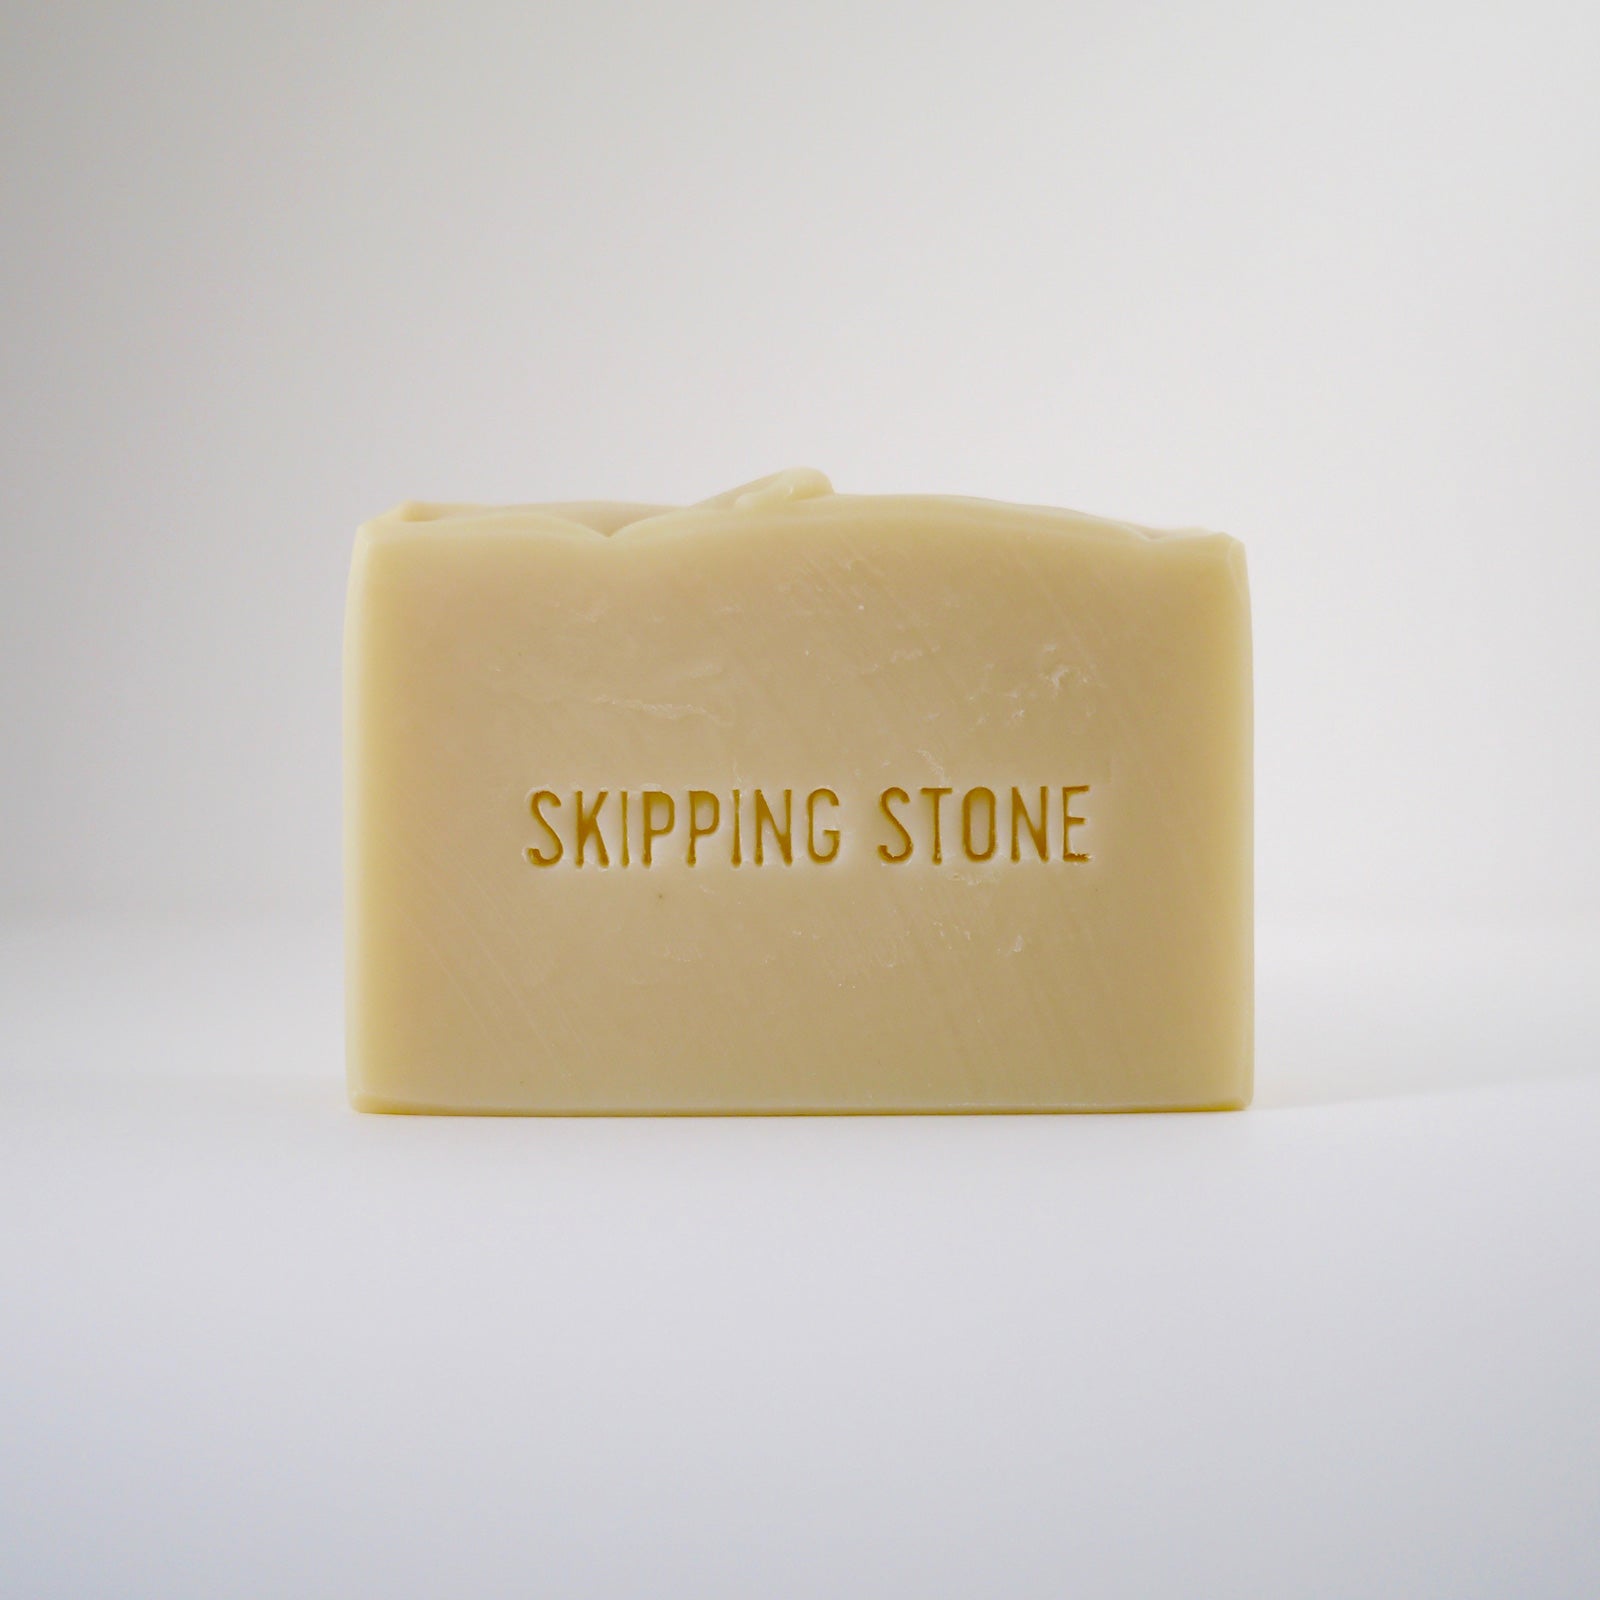 Skipping Stone Soap Pure. Body + Face Soap – unscented